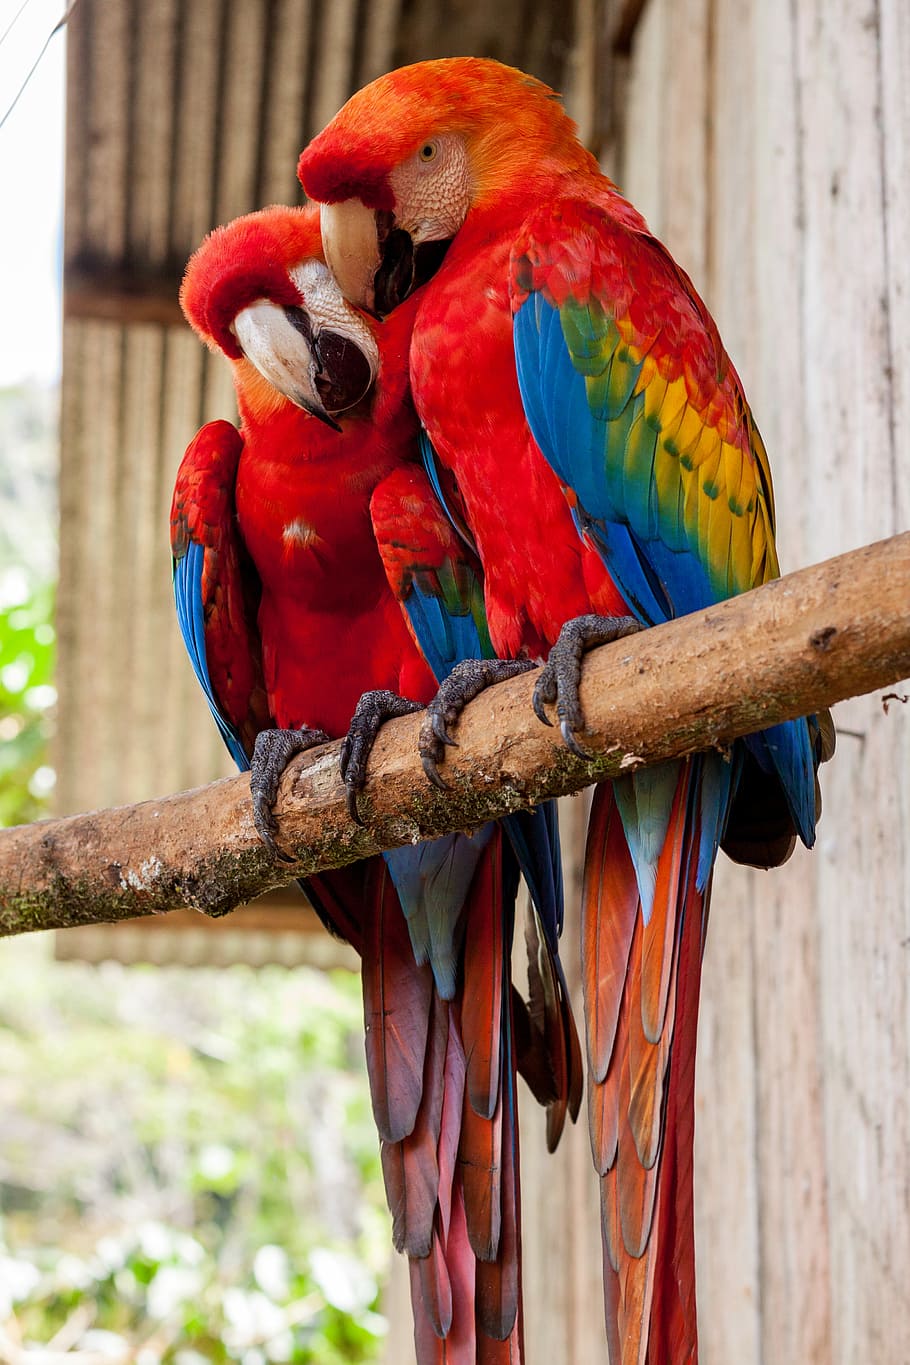 two red parrots on stick, two red macaws on wood branch near wooden house